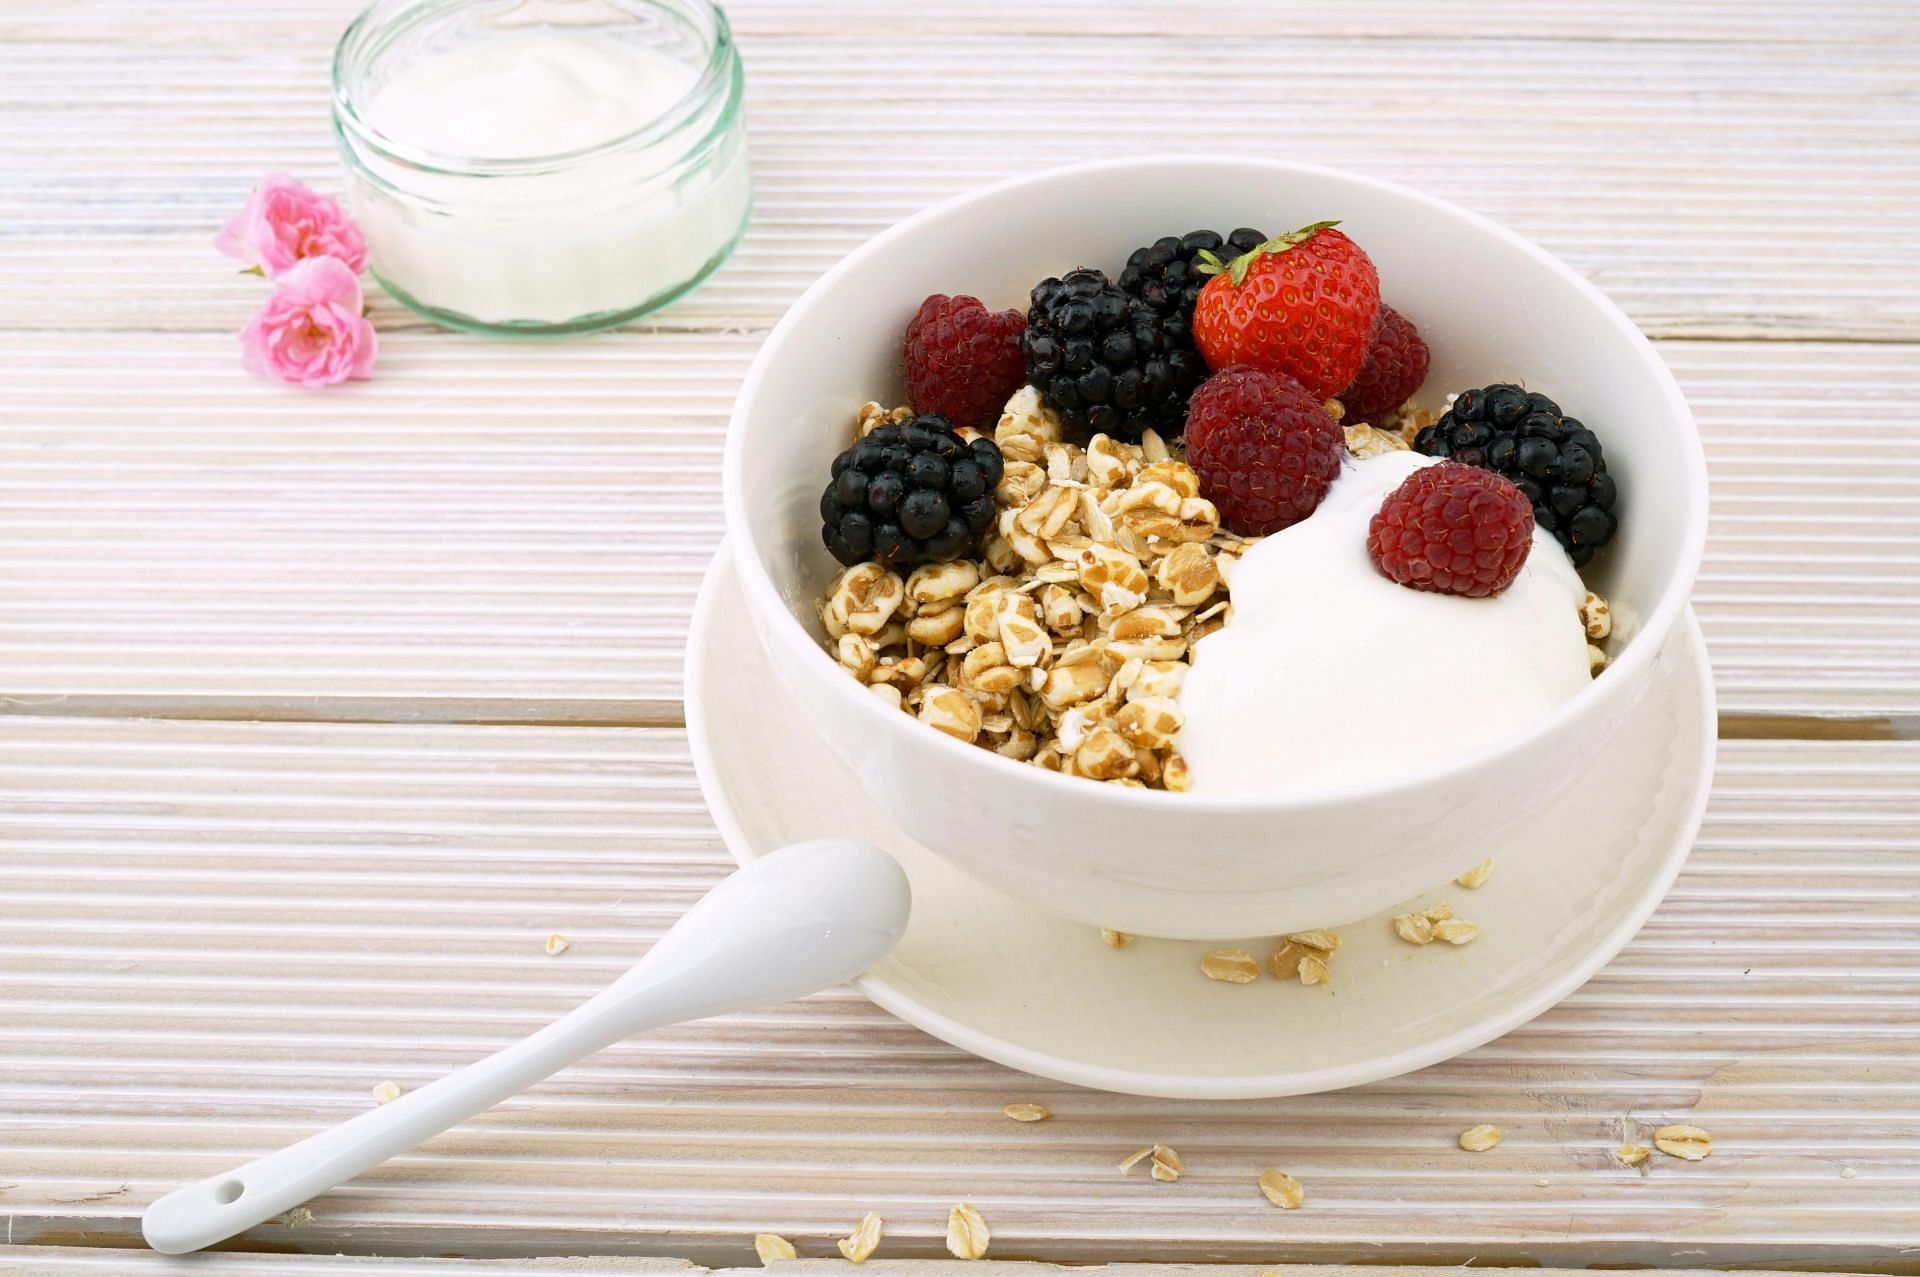 tips to manage lactose intolerance (image sourced via Pexels / Photo by life of pix)